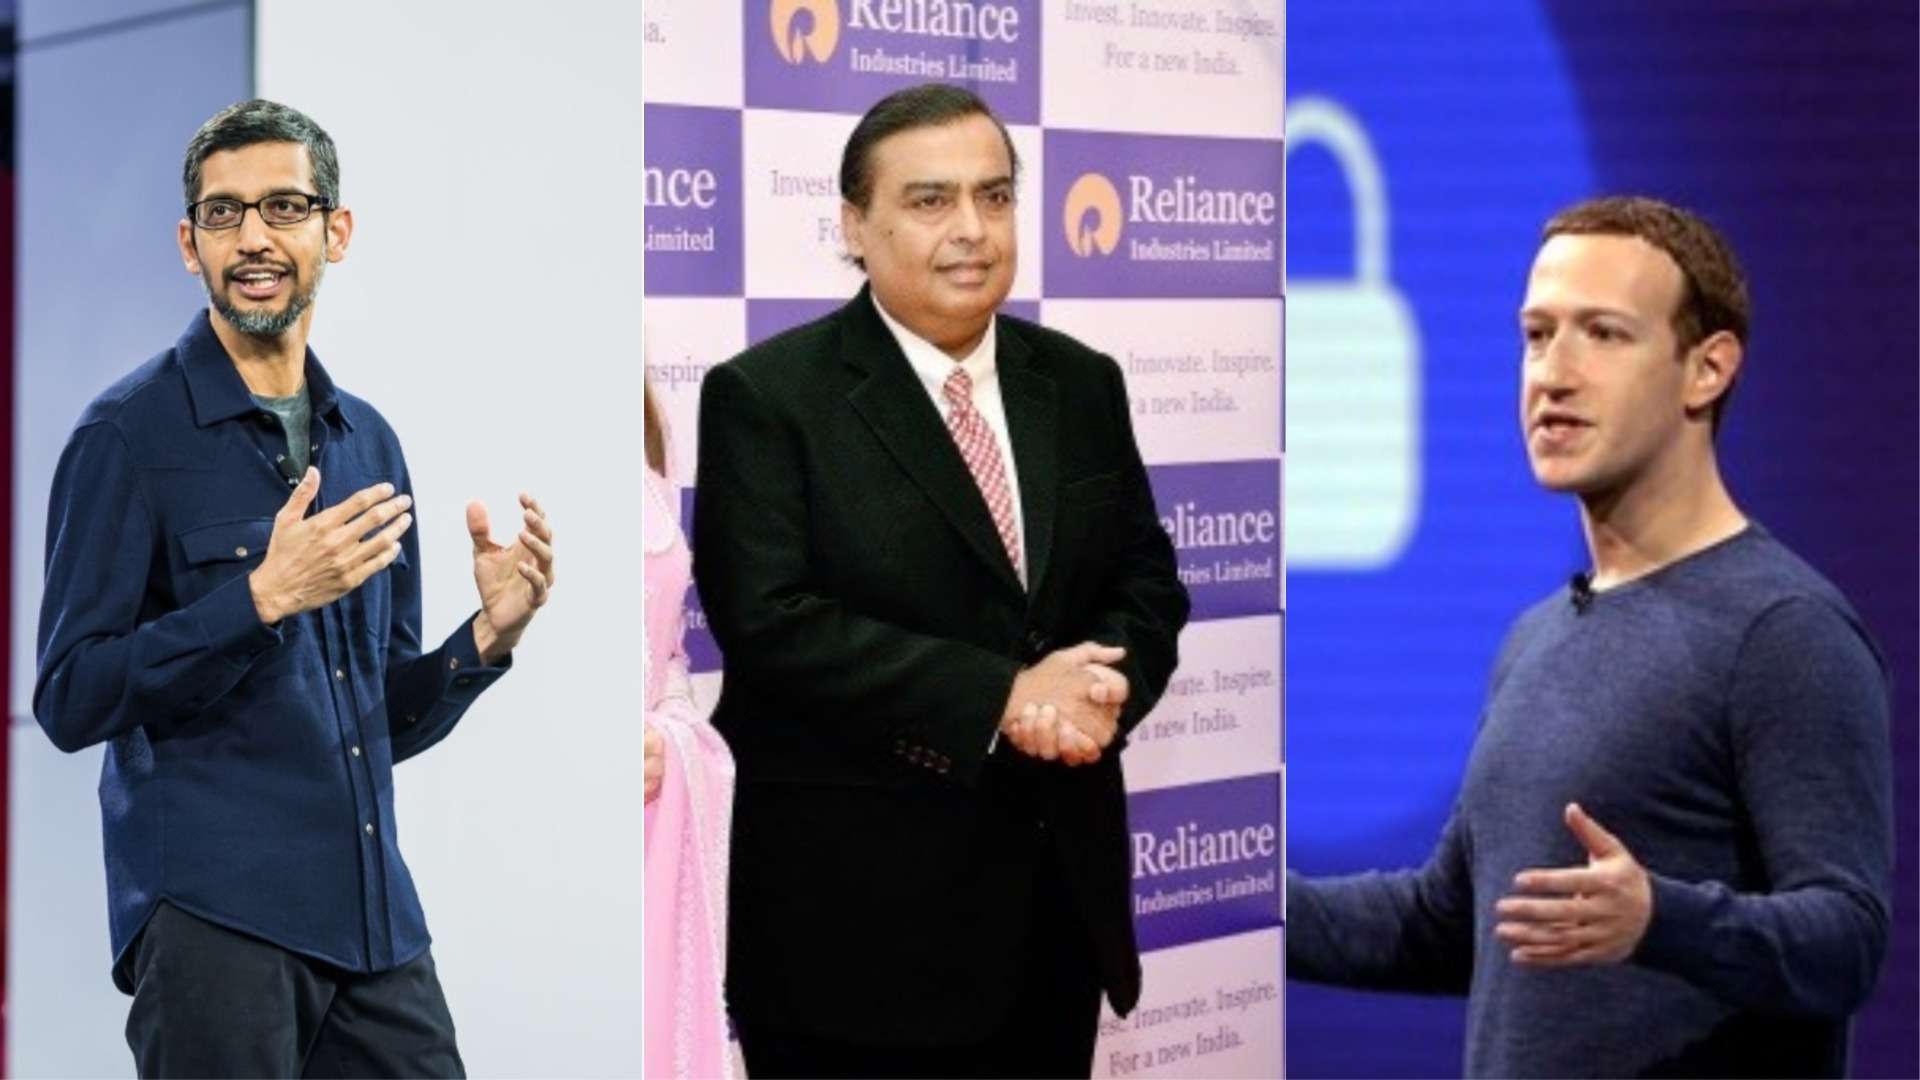 India's Reliance Jio Platforms to sell $250 million stake to L